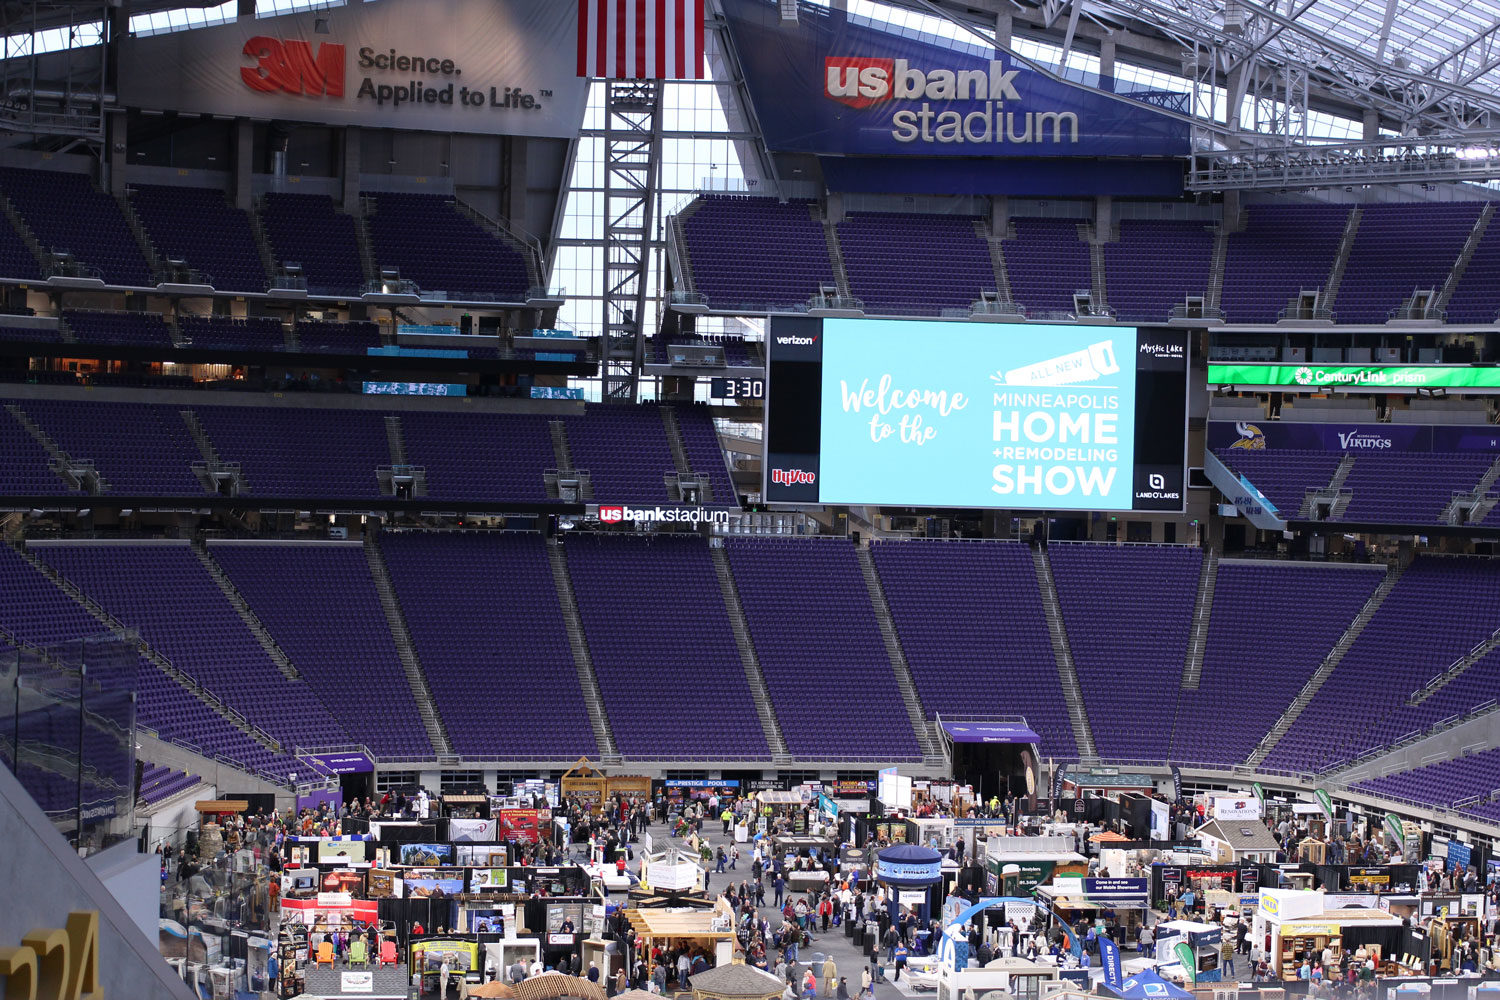 Bird's Eye View of the Minneapolis Home and Remodeling Show at US Bank Stadium